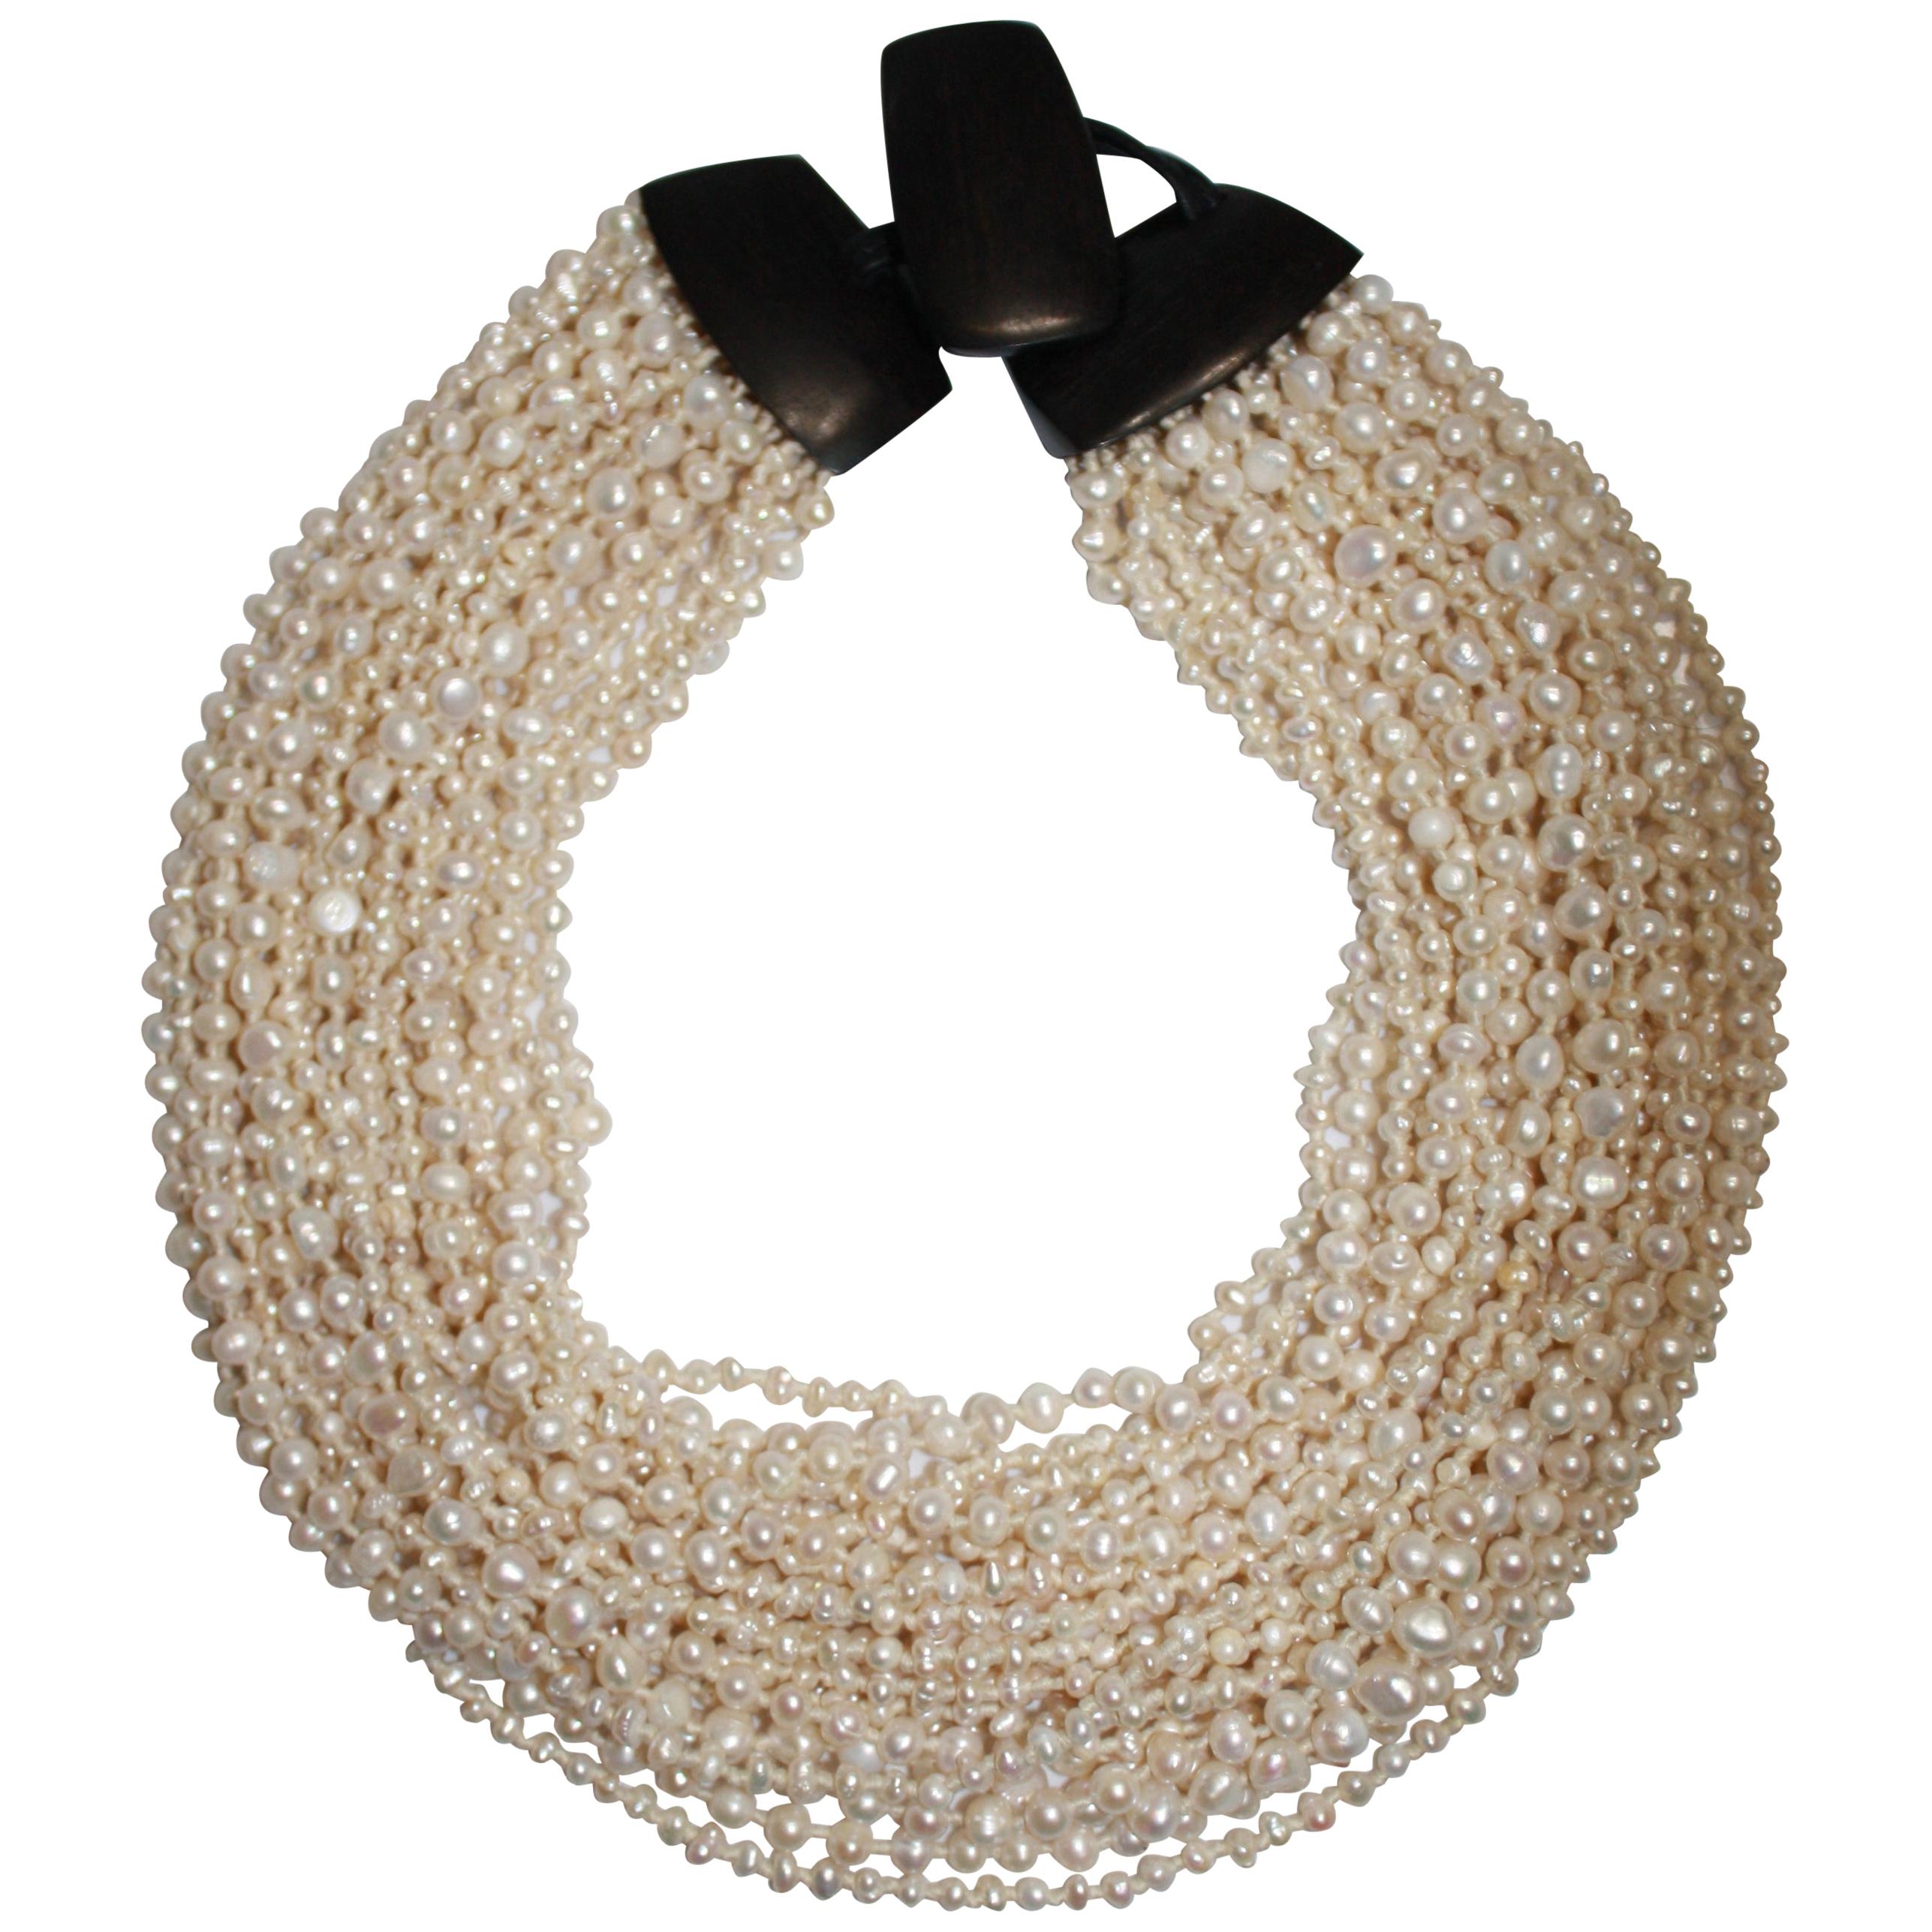 Monies Multi Strand Freshwater Pearls, Horn And Leather Choker